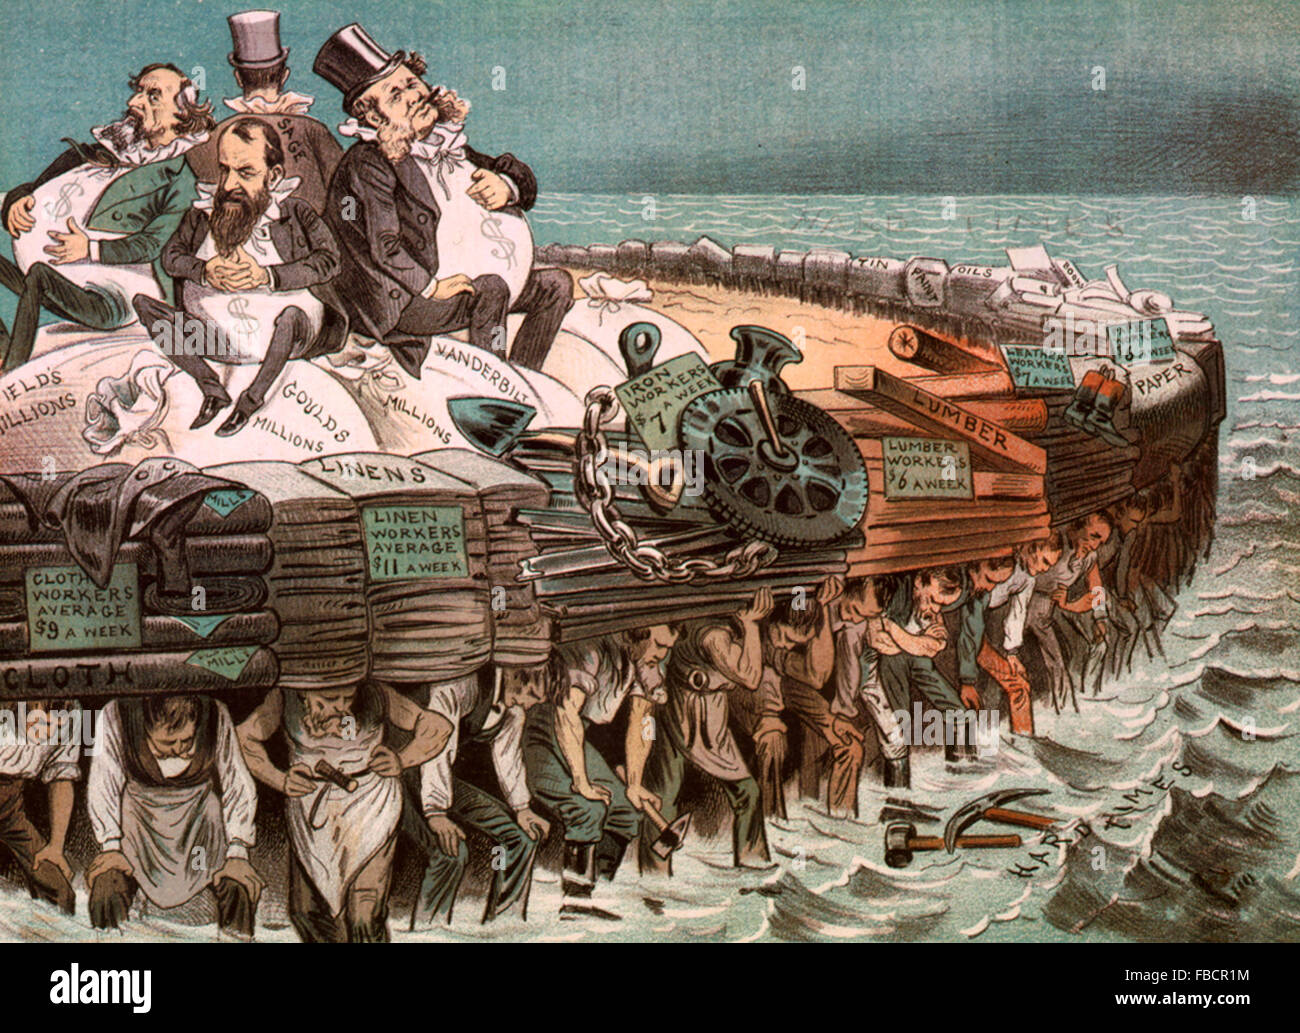 Protectors of Our Industries - Political Cartoon showing Cyrus Field, Jay Gould, Cornelius Vanderbilt, and Russell Sage, seated on bags of 'millions', on large raft, and being carried by workers of various professions. Stock Photo